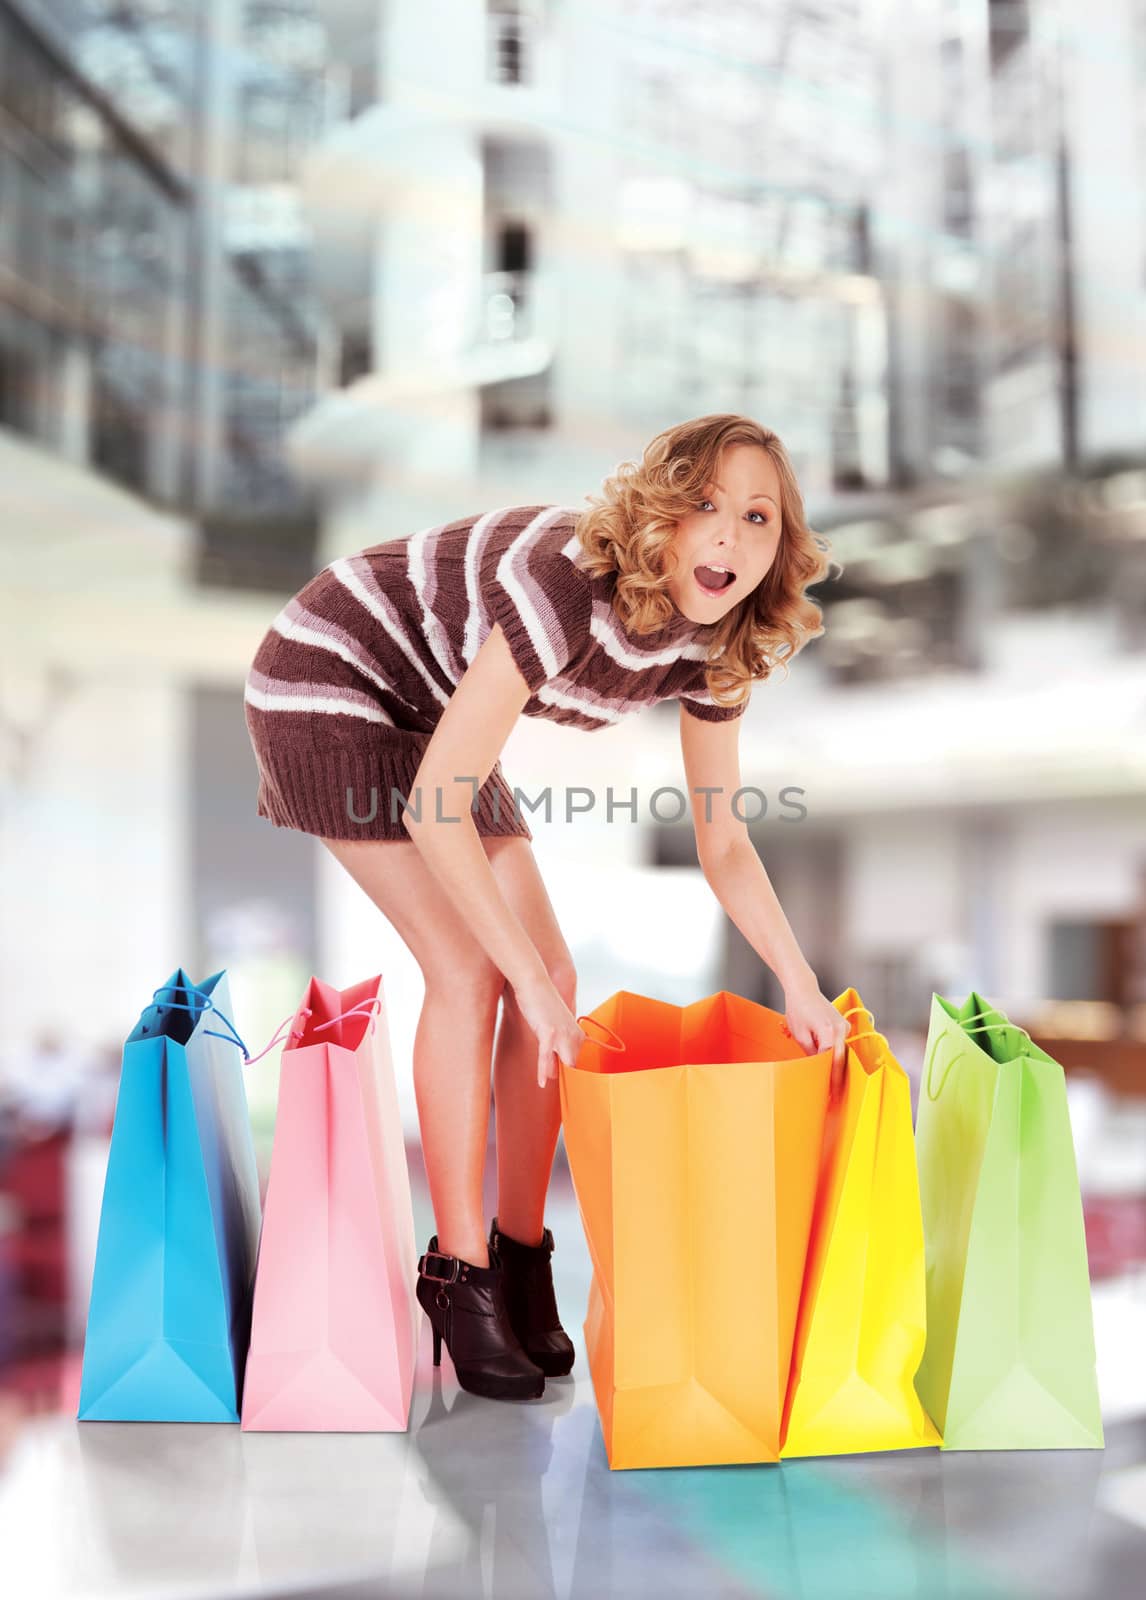 happy smiling woman shopping, background digitally added, workpath